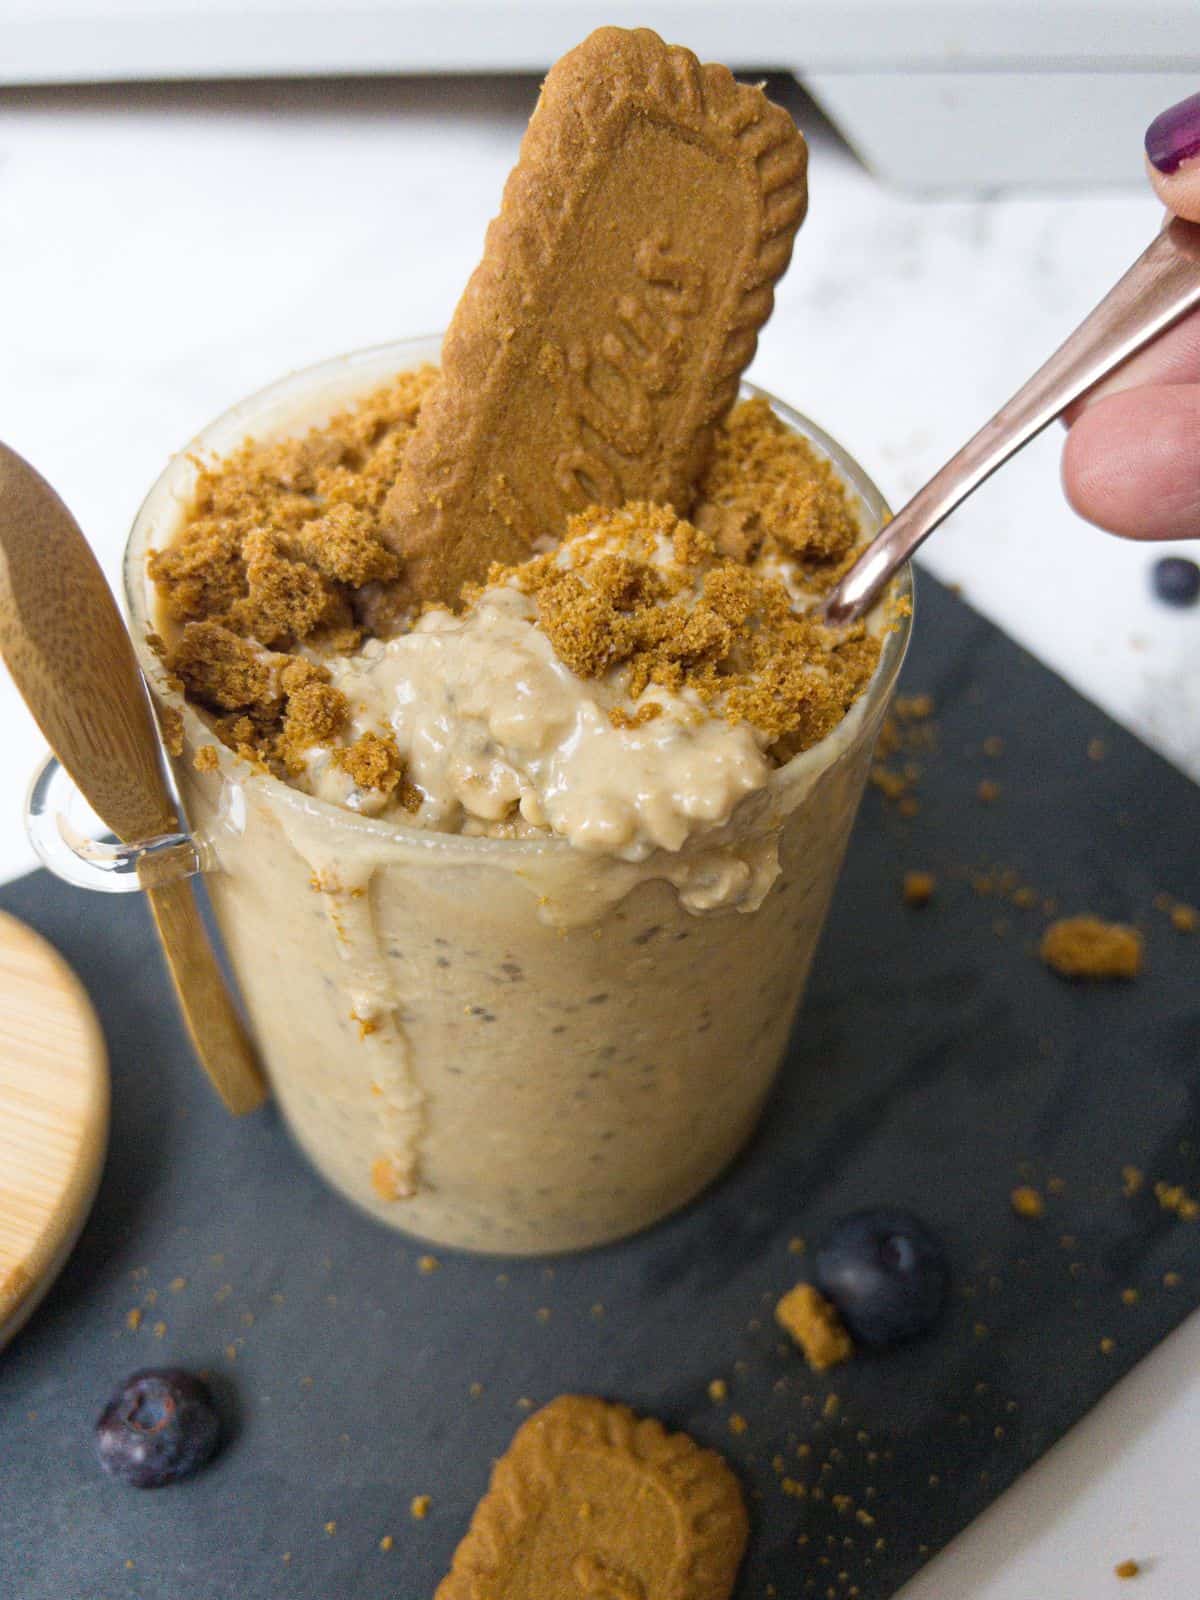 Overnight oats in a glass jar, with a spoon being dipped into it,topped with crumbled Biscoff biscuits and a whole biscoff biscuit. Jar sitting on a gre board with crumbs and a biscuit scattered around.